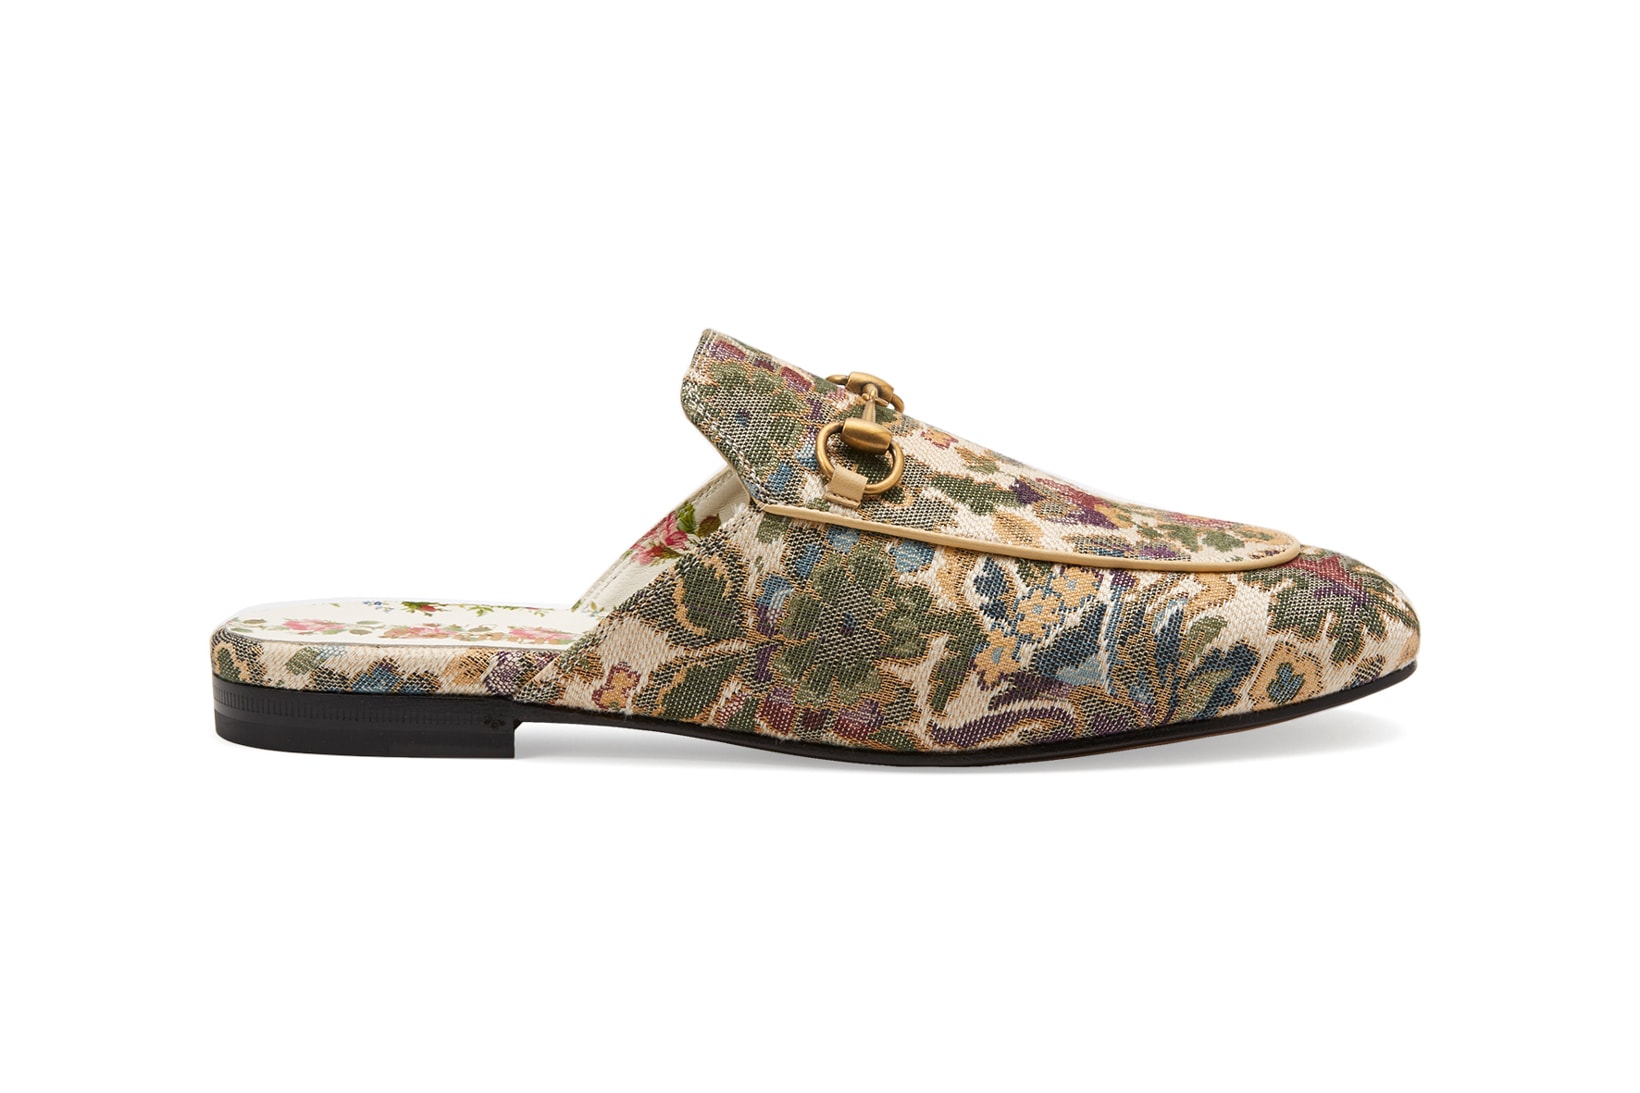 Gucci Garden Capsule Collection Princetown Embroidered Slipper Green Gold